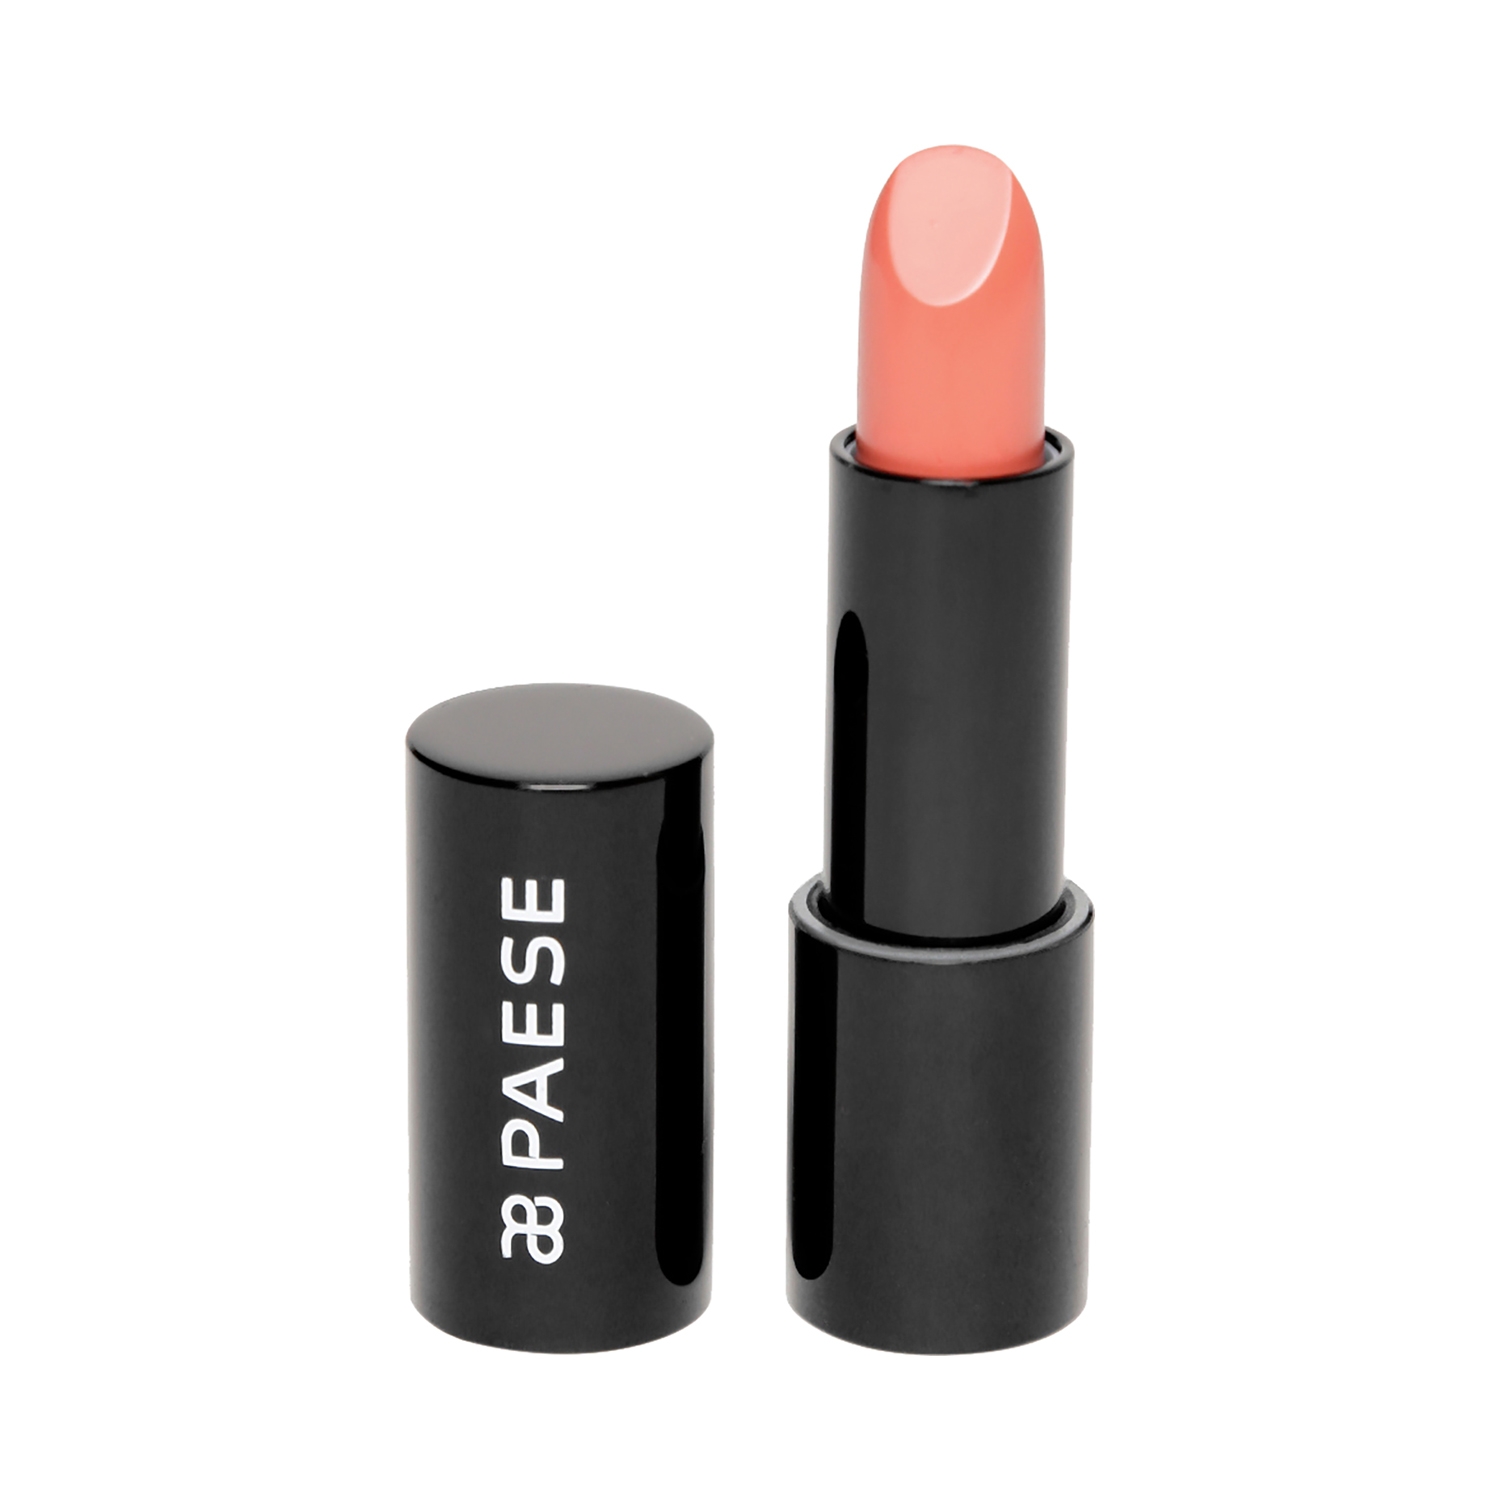 Paese Cosmetics | Paese Cosmetics Lipstick with Argan Oil - 10 Shade (4.3g)